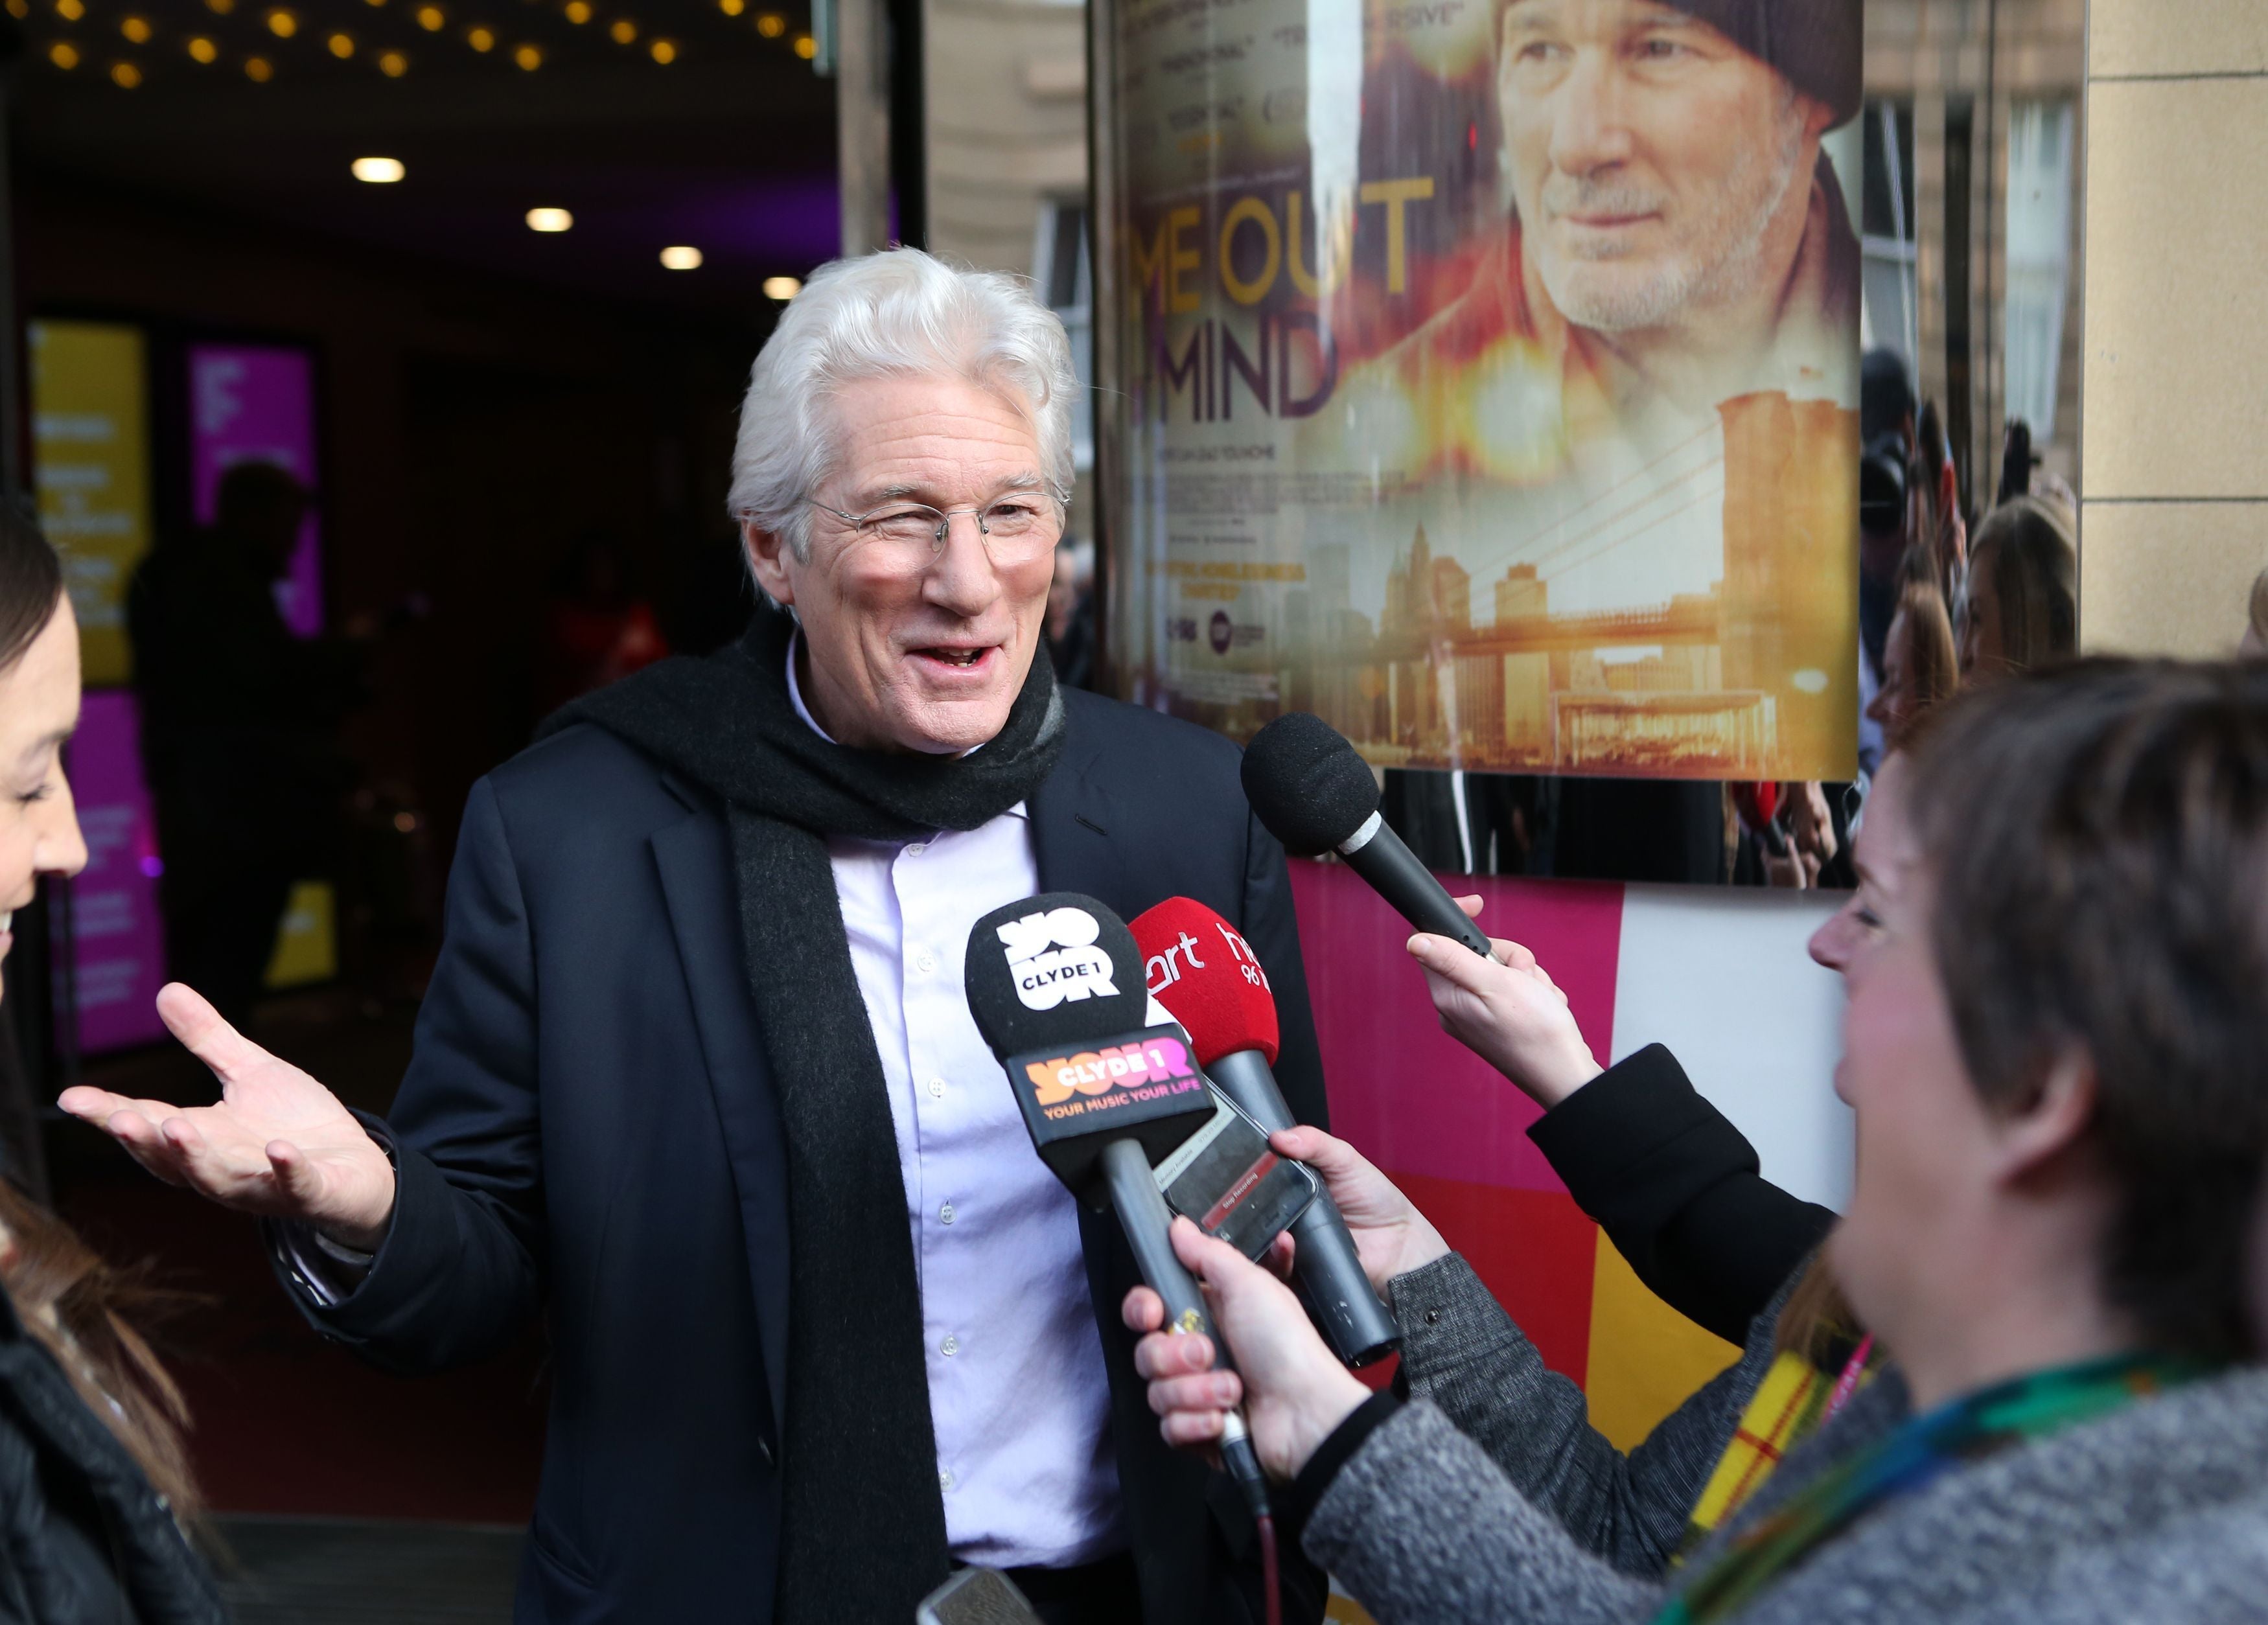 Richard Gere talks to waiting media as he attends the UK premiere of his movie, Time Out of Mind, at the Glasgow Film Theatre, as part of the Glasgow Film Festival. (Andrew Milligan/PA)